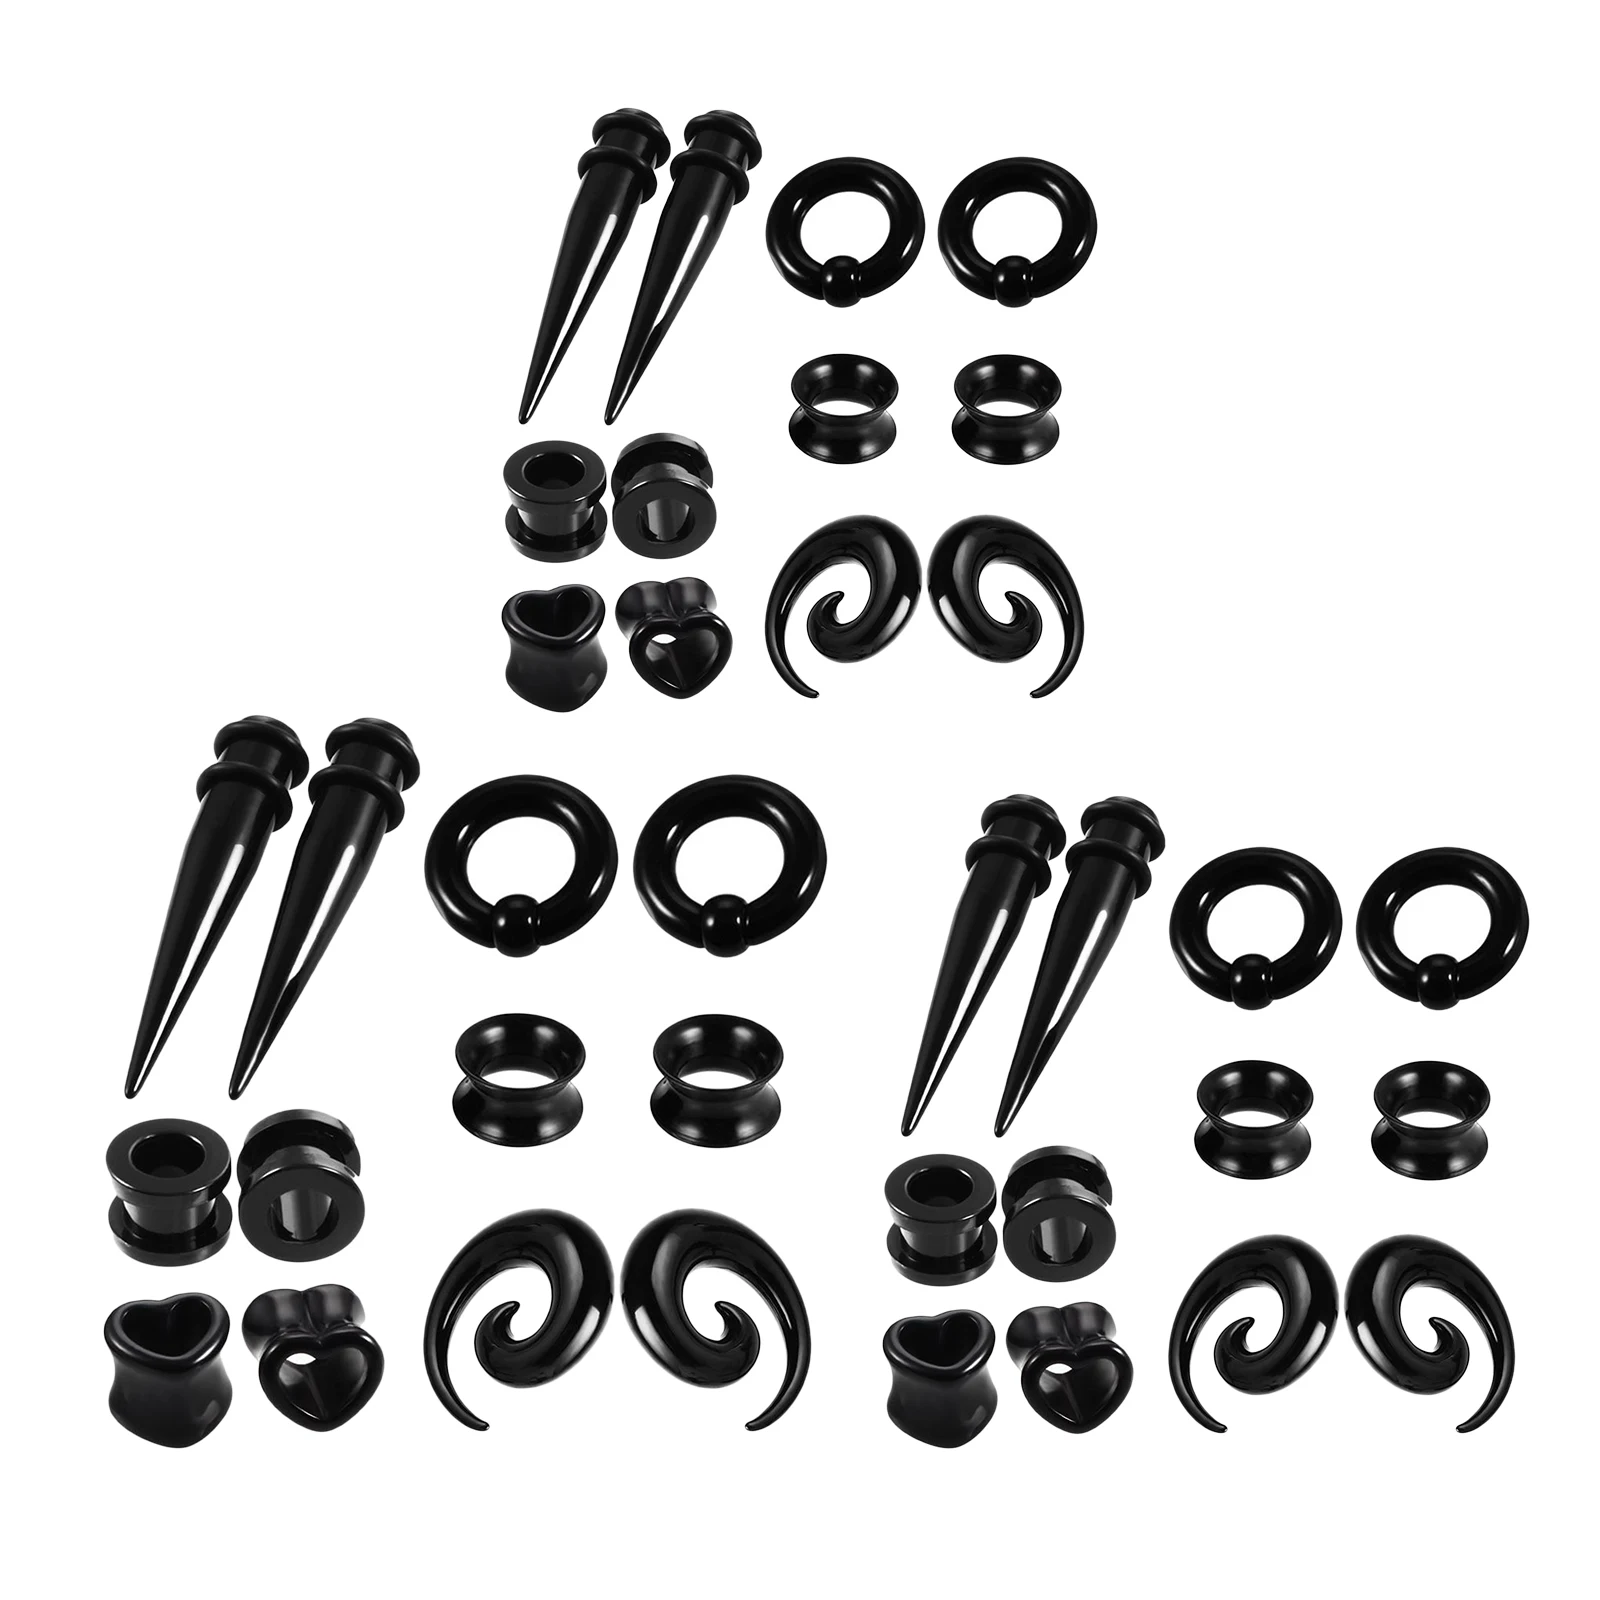 12 Pieces Ear Stretching Kit Set 6/8 / 10mm Acrylic Cone And Plug Body